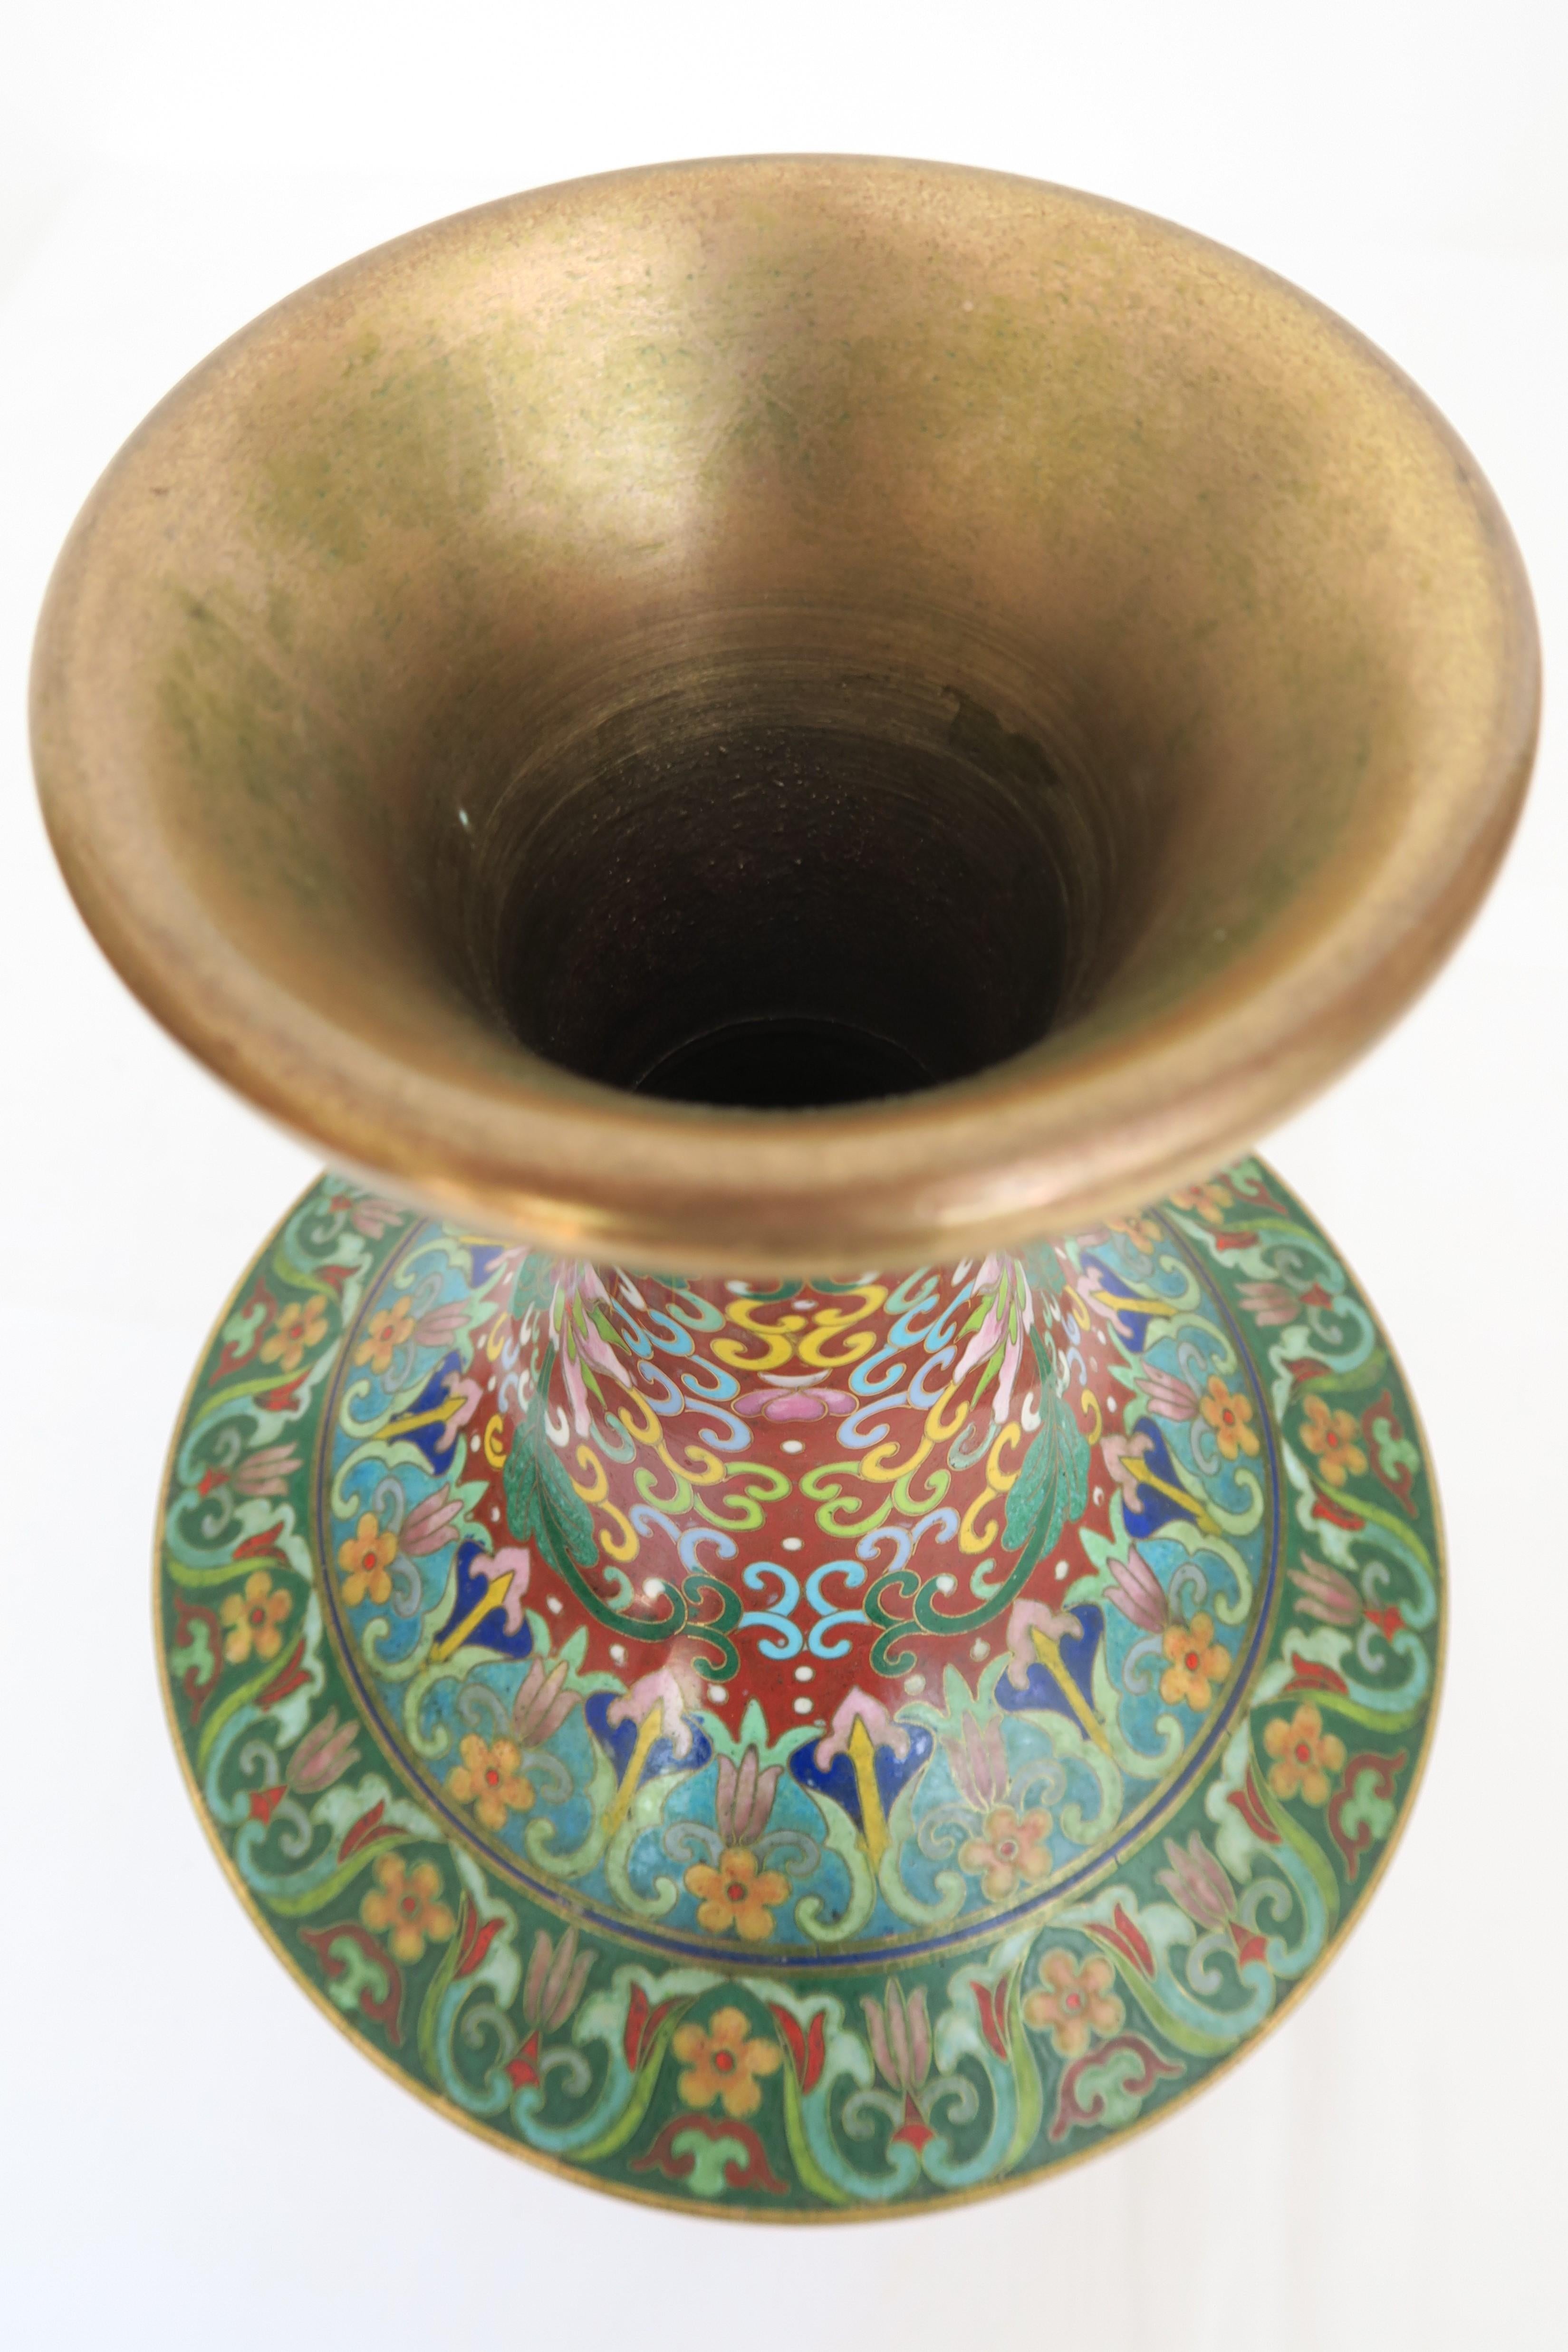 20th Century Late Quing Dynasty Cloisonné Vase